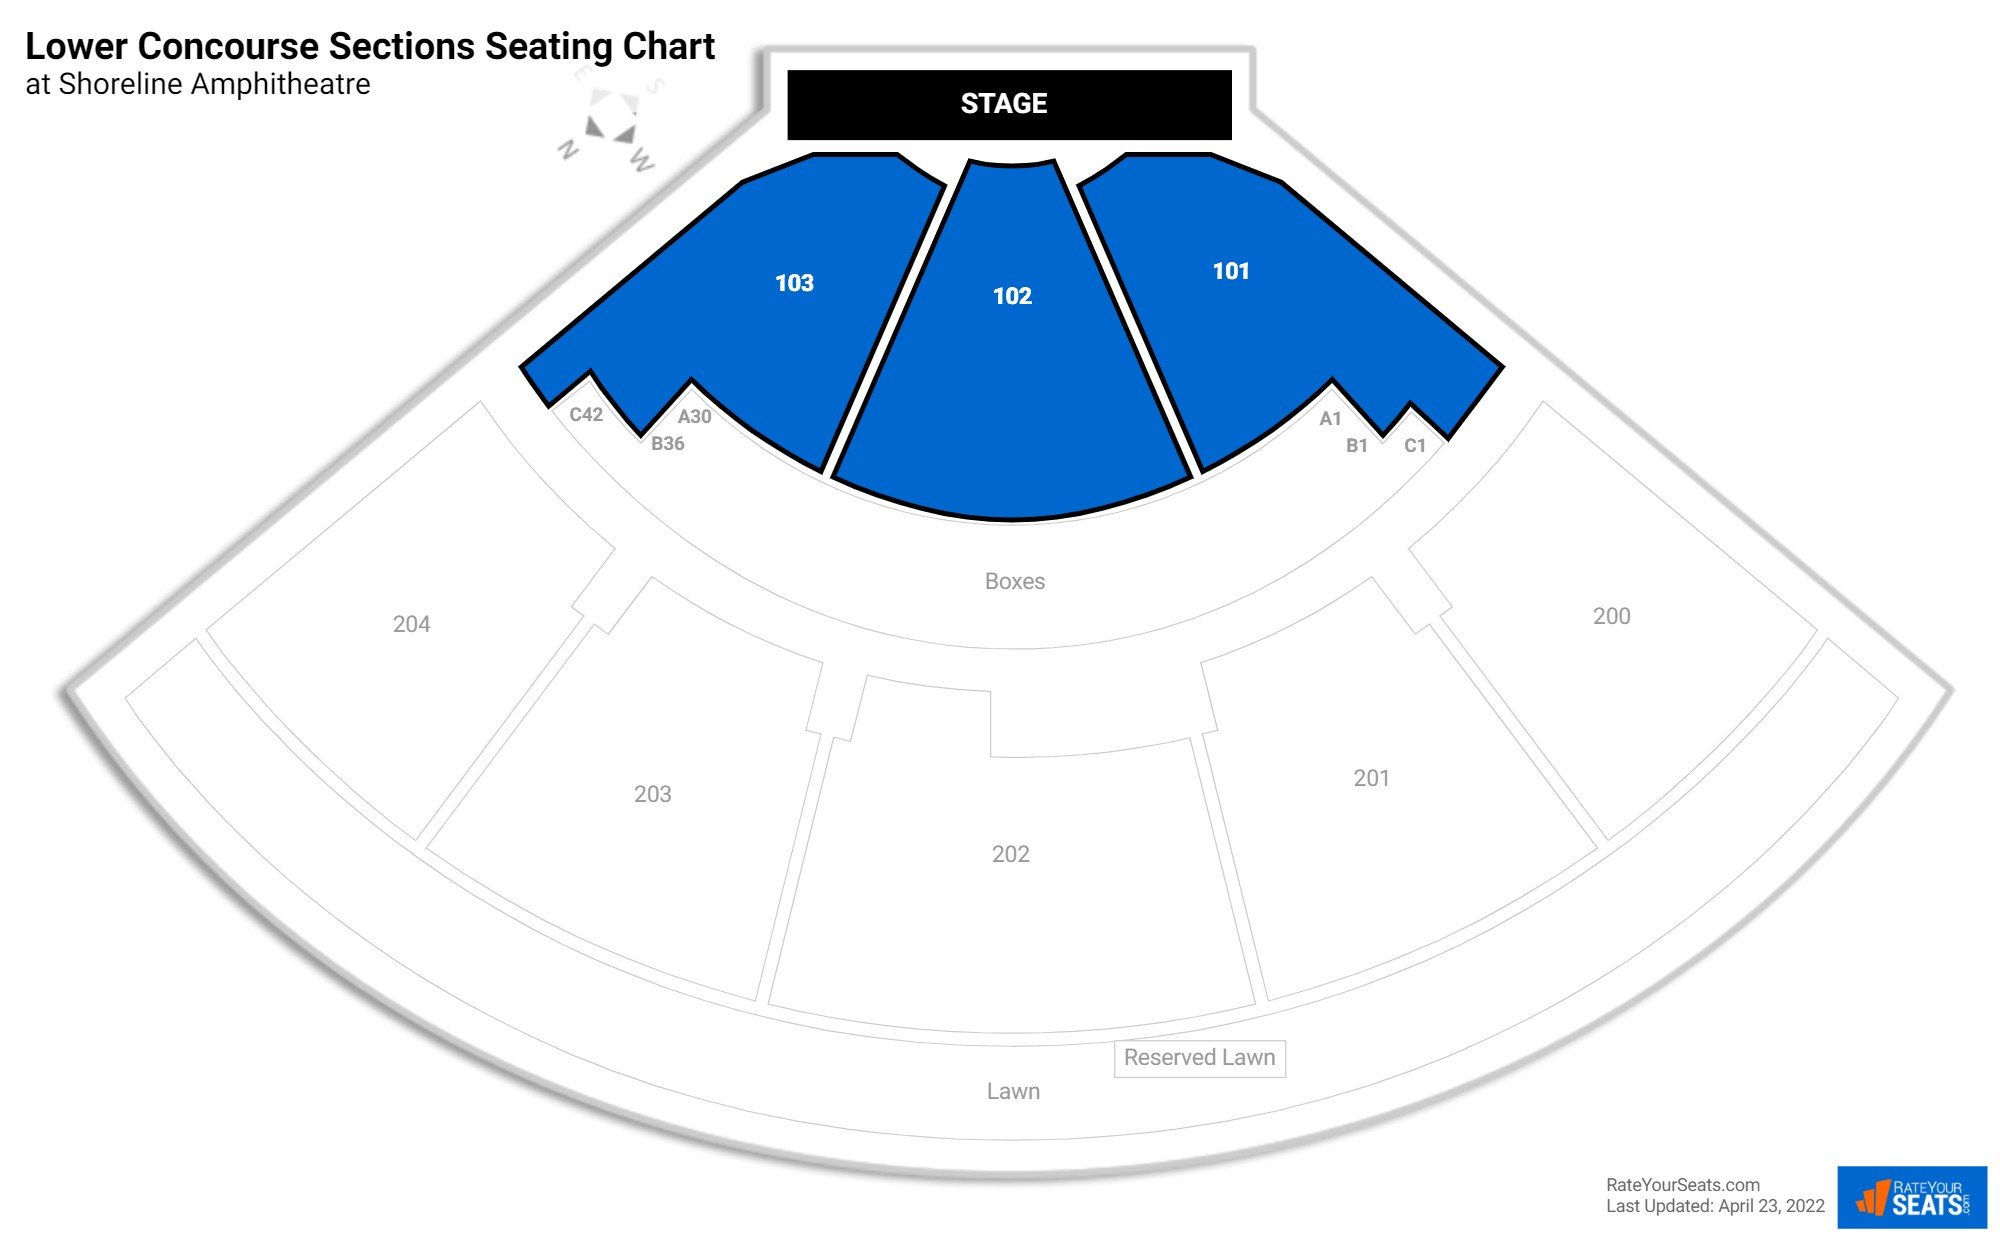 Concert Lower Concourse Sections Seating Chart at Shoreline Amphitheatre